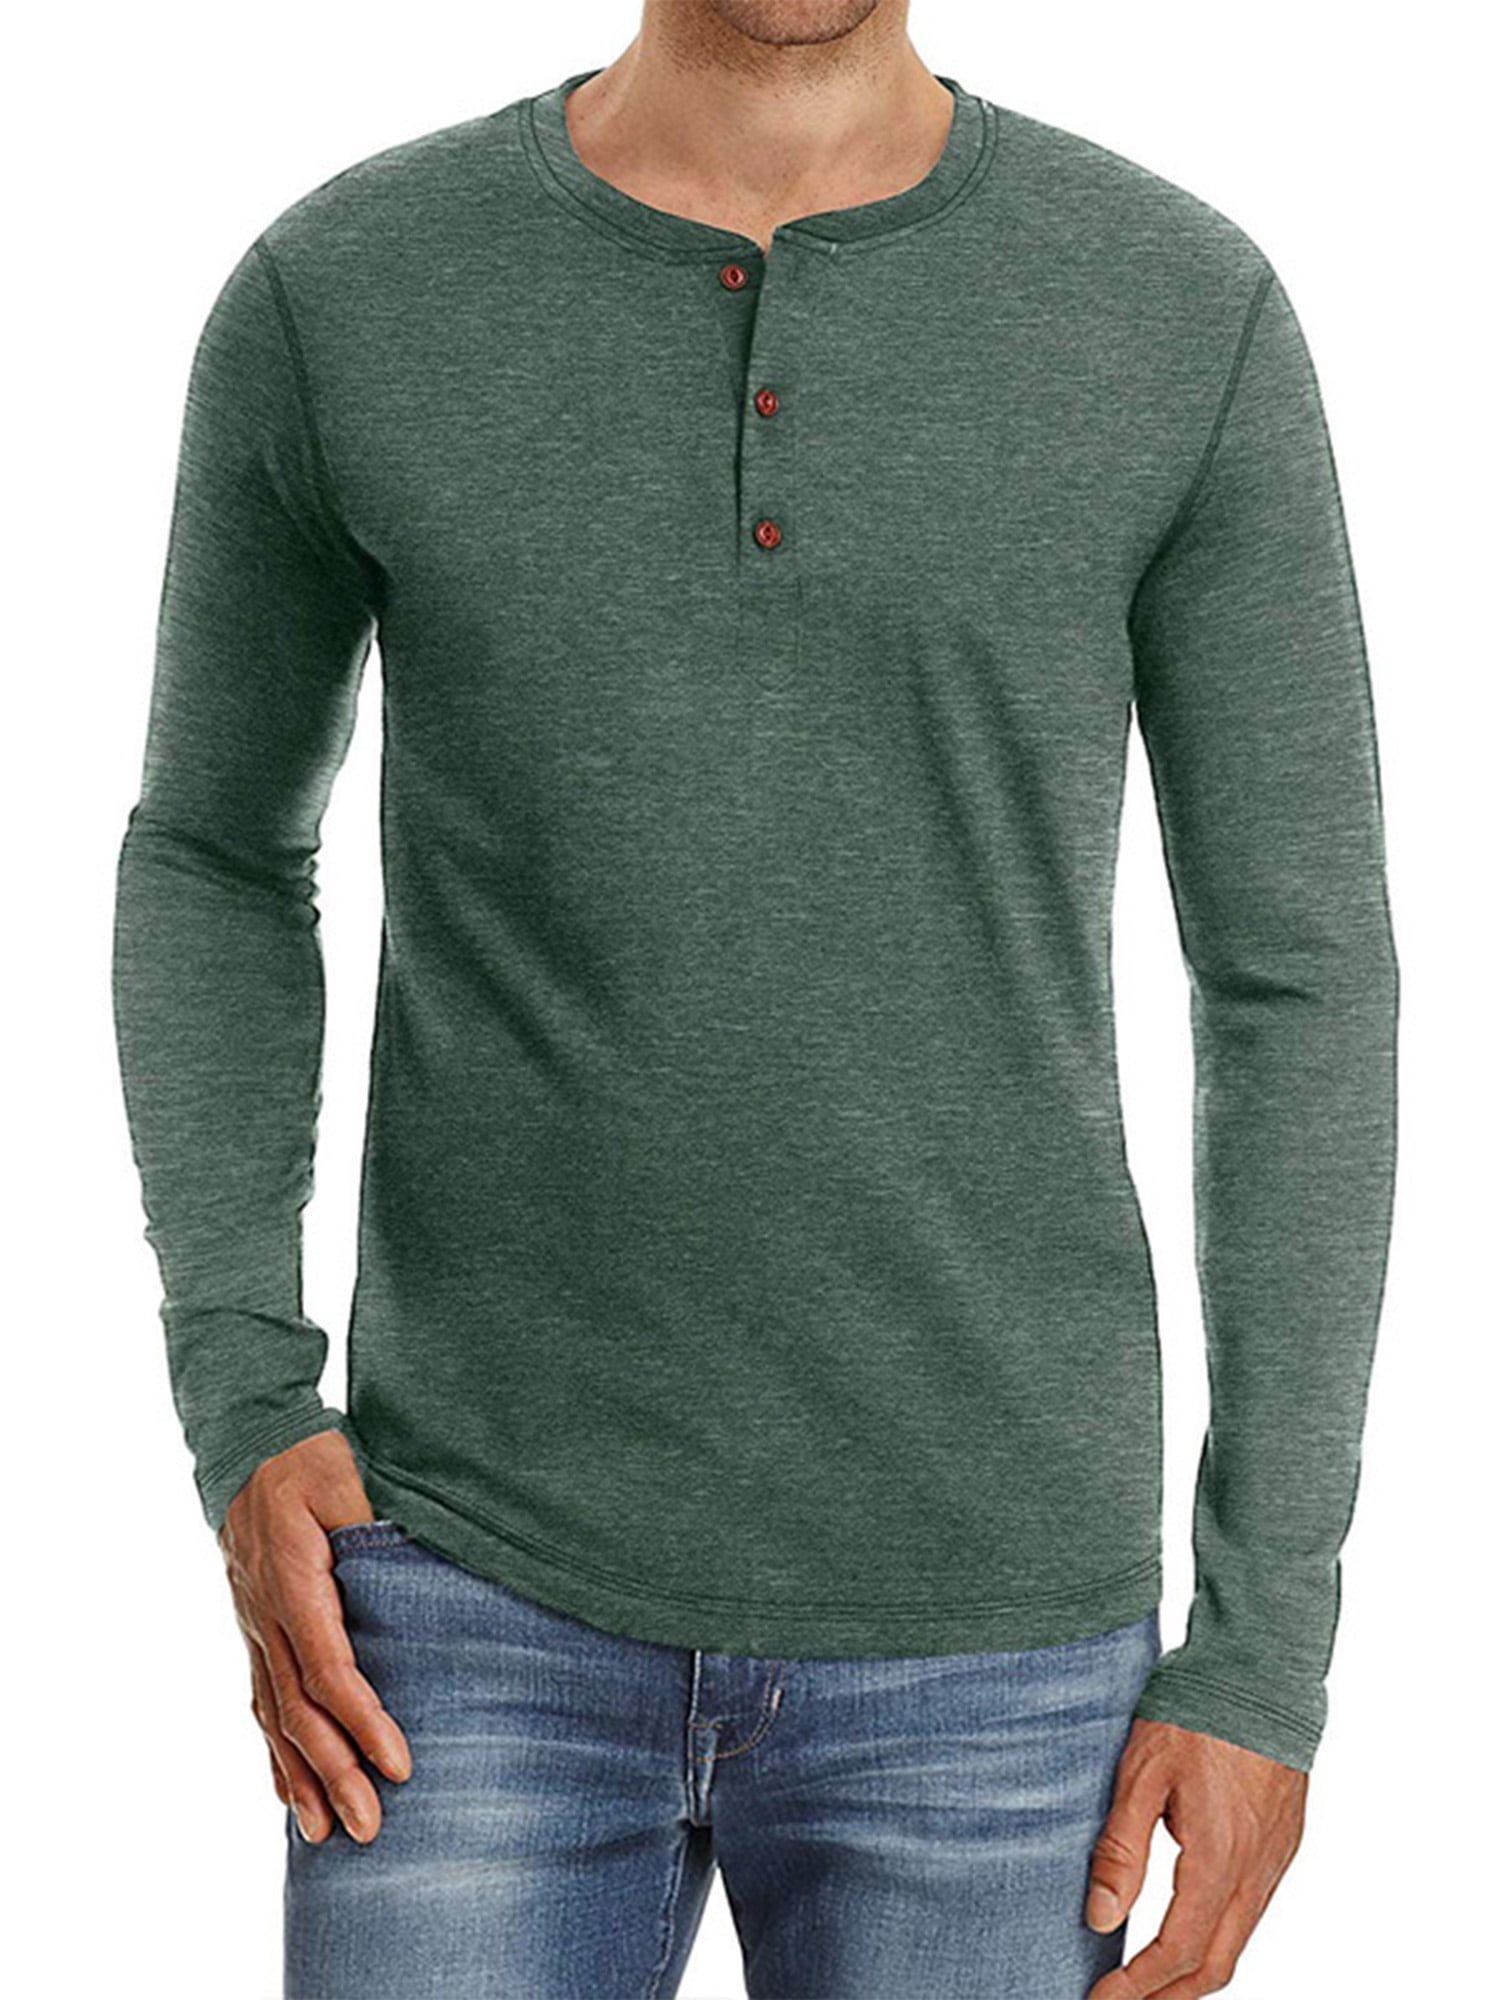 Mens Casual Shirt Breathable Long Sleeve Loose Solid Color V Neck Top Blouse M 2XL Spring Autumn Summer Handsome Men Shirt,Green,M 